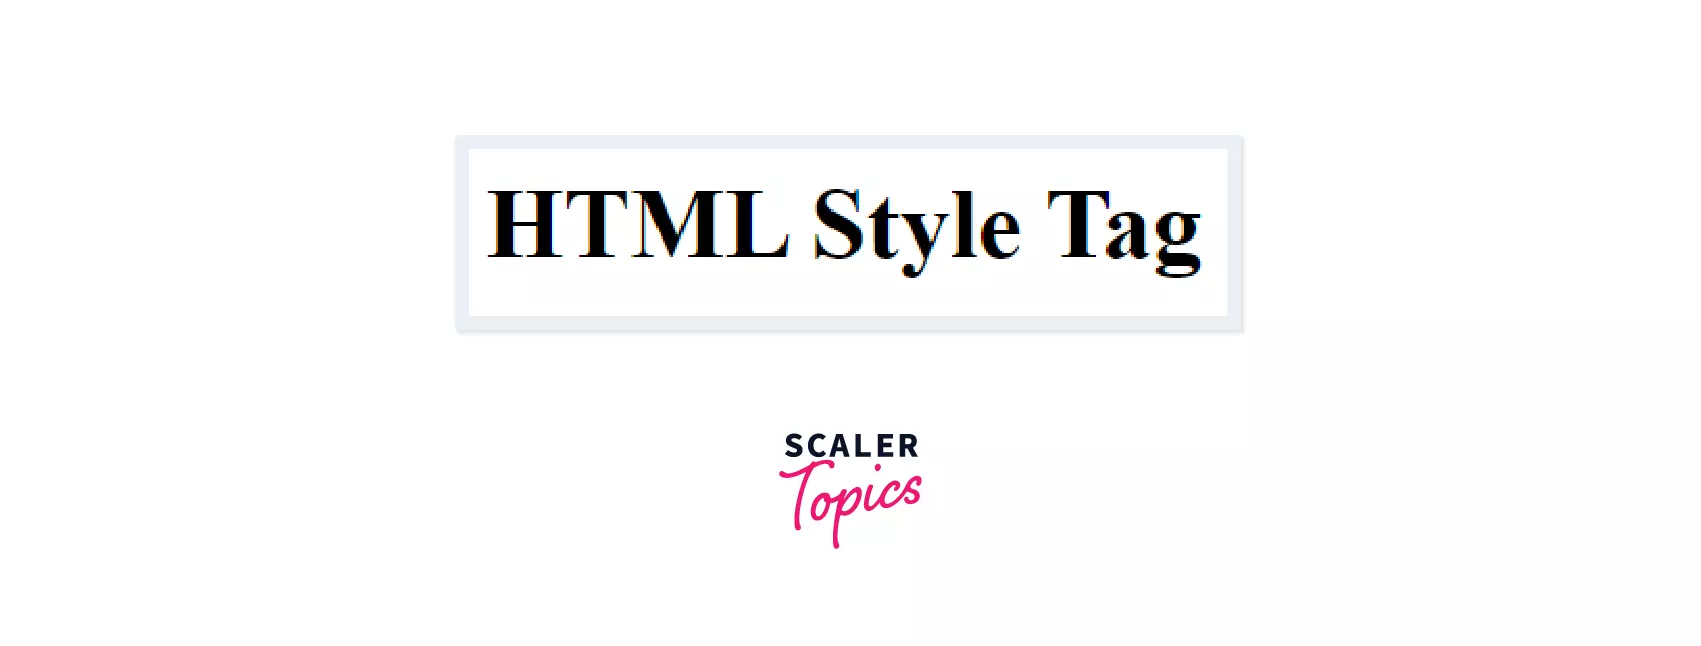 Output of style tag used in HTML